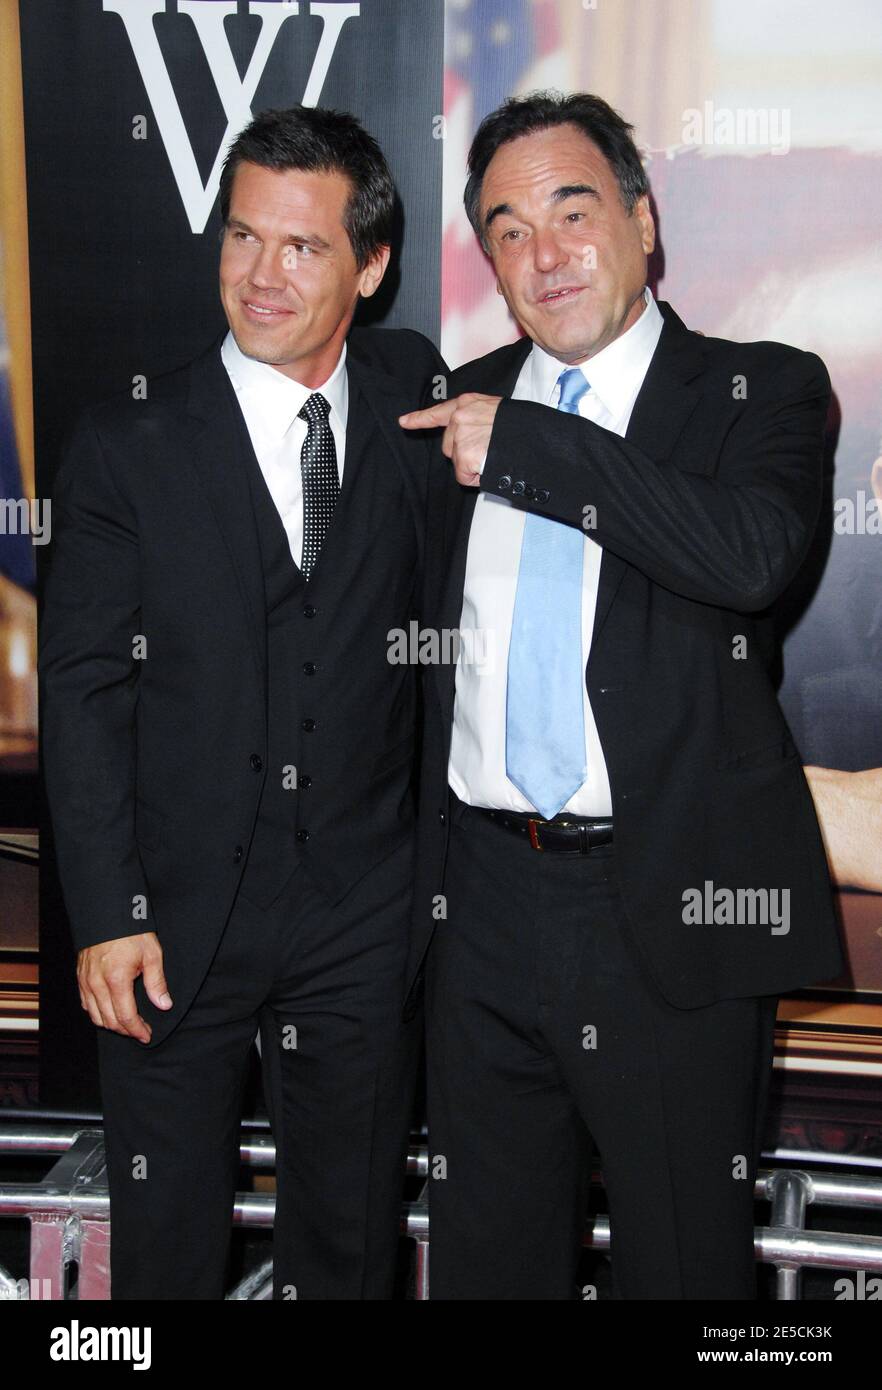 Director Oliver Stone (R) and actor Josh Brolin attending the premiere of 'W' at the Ziegfeld Theatre in New York City, NY, USA on October 14, 2008. Photo by Gregorio Binuya/ABACAPRESS.COM Stock Photo